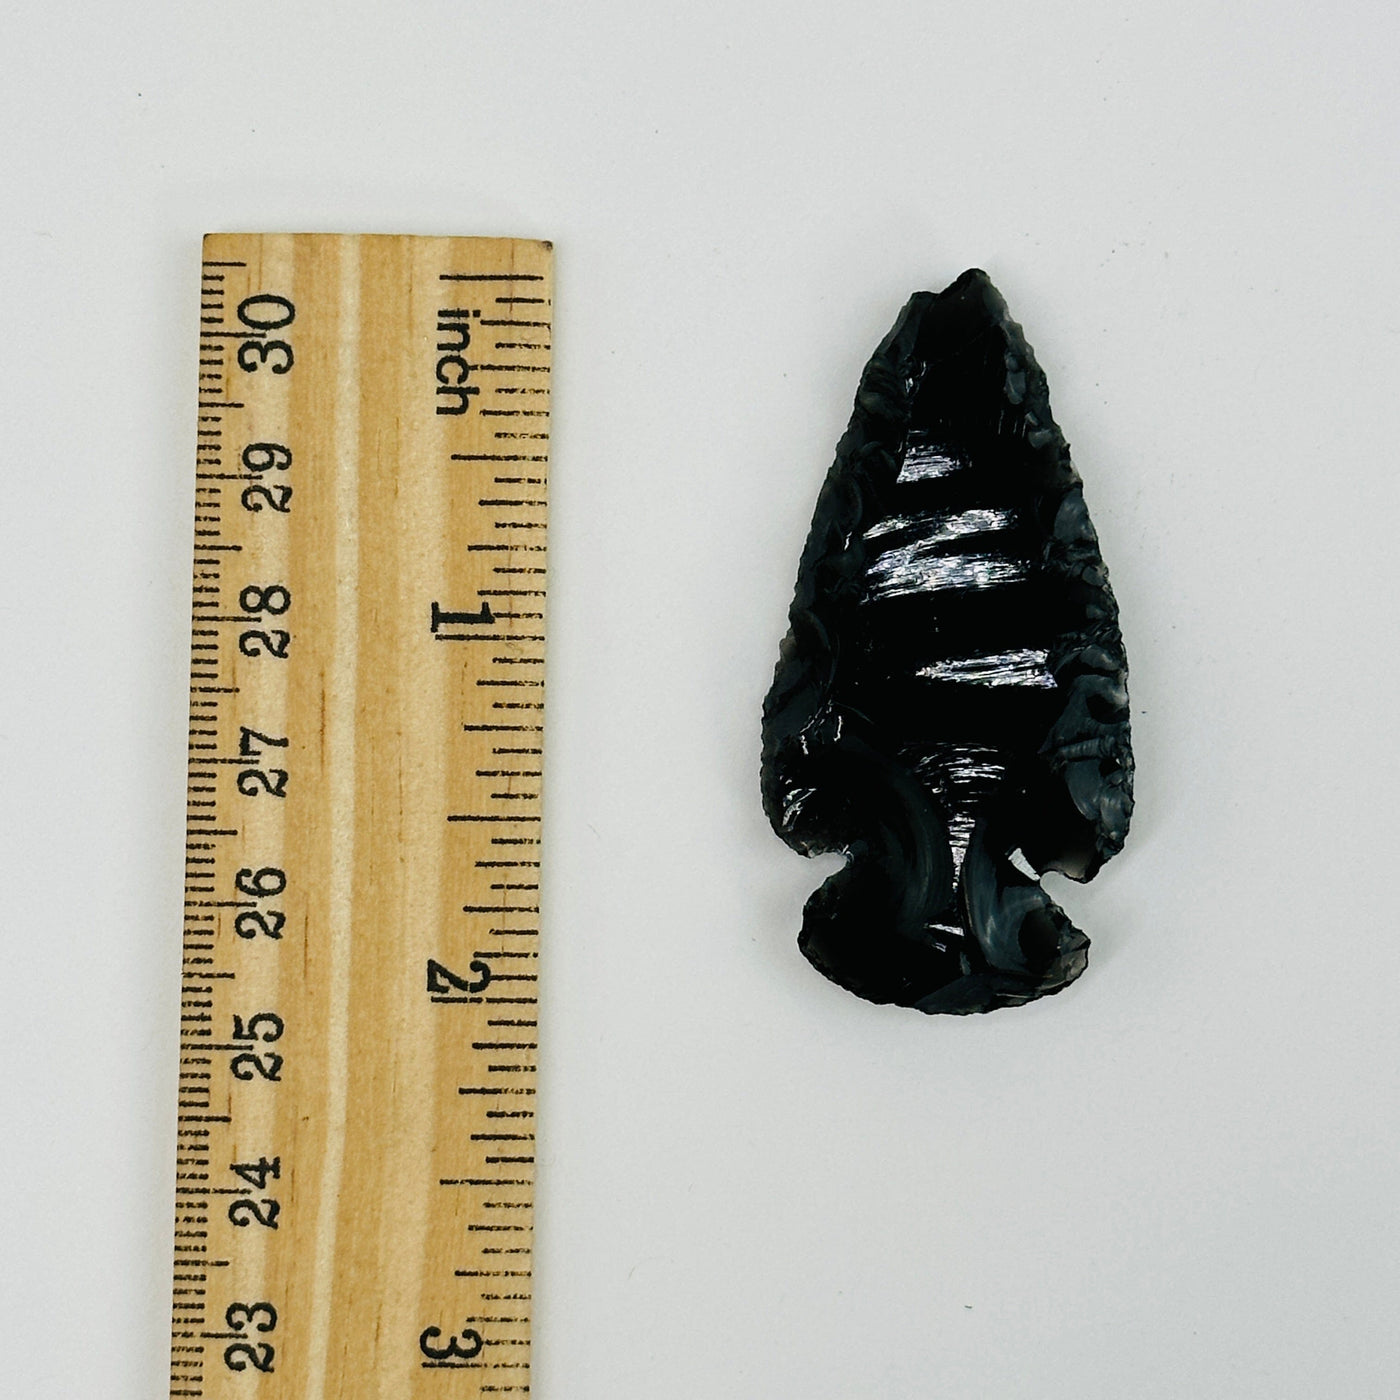 obsidian arrowhead next to a ruler for size reference